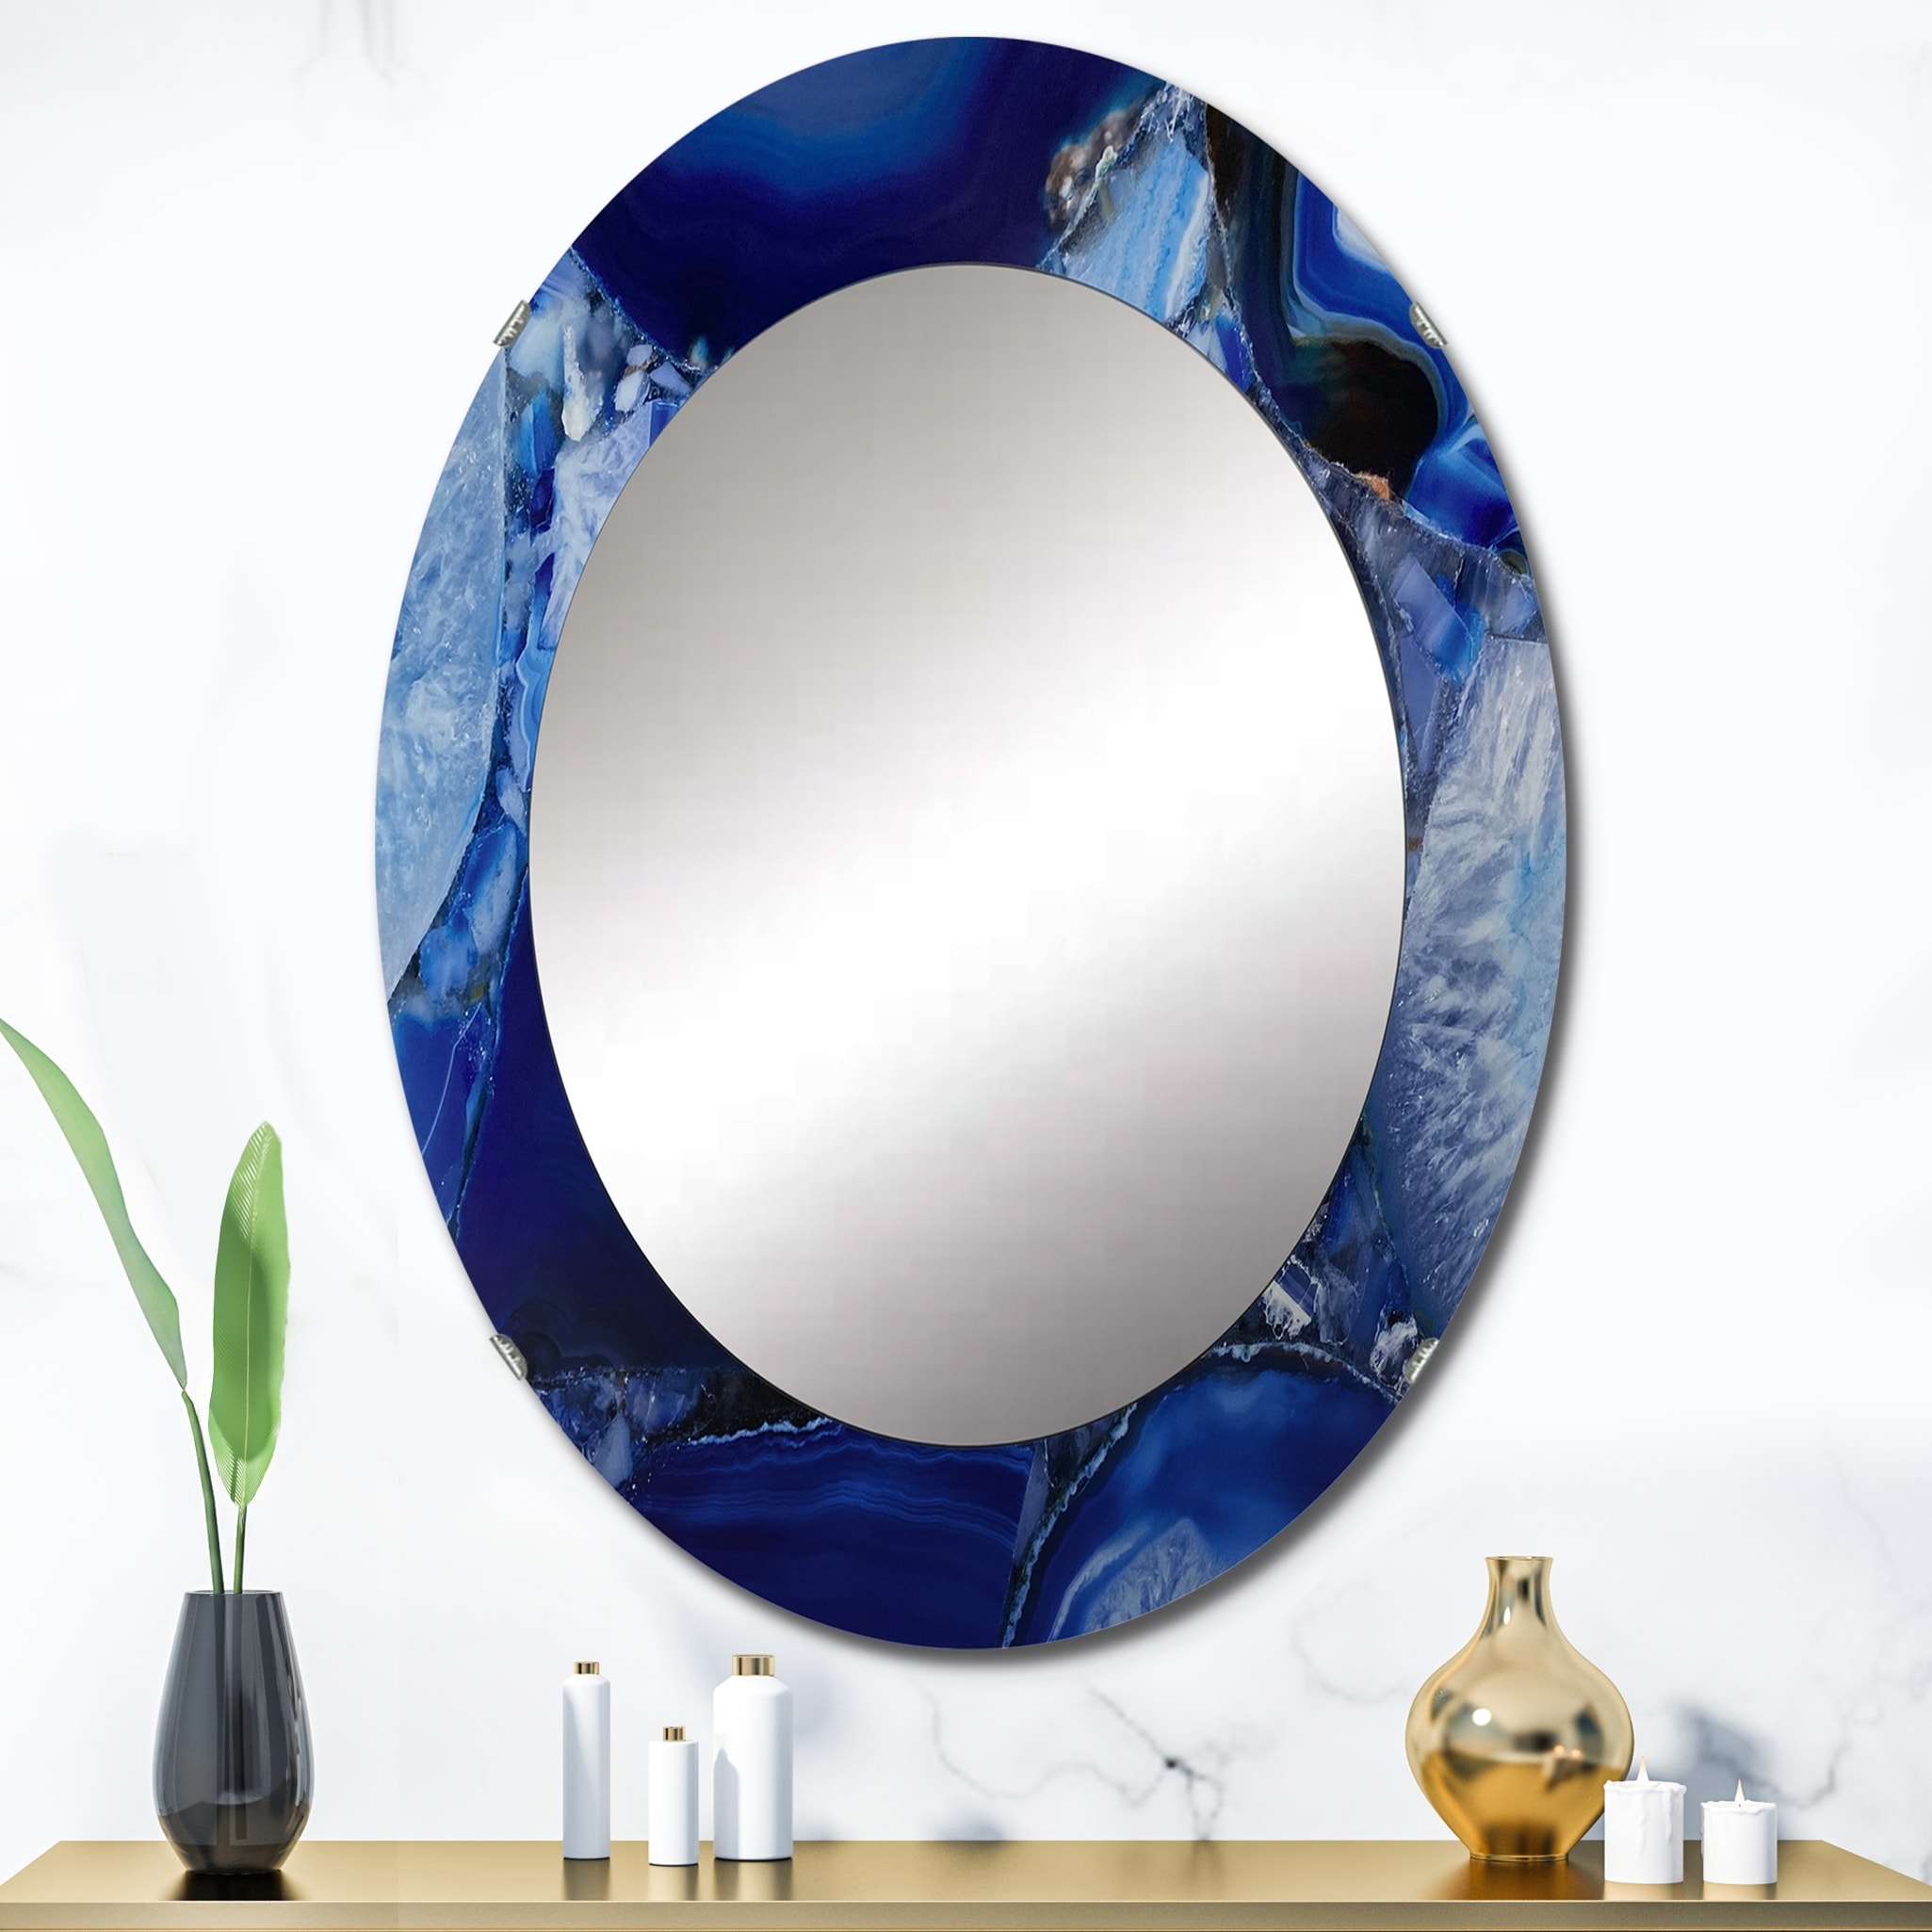 Designart 'Marbled Geode 11' Printed Mid-Century Oval or Round Wall Mirror - Blue